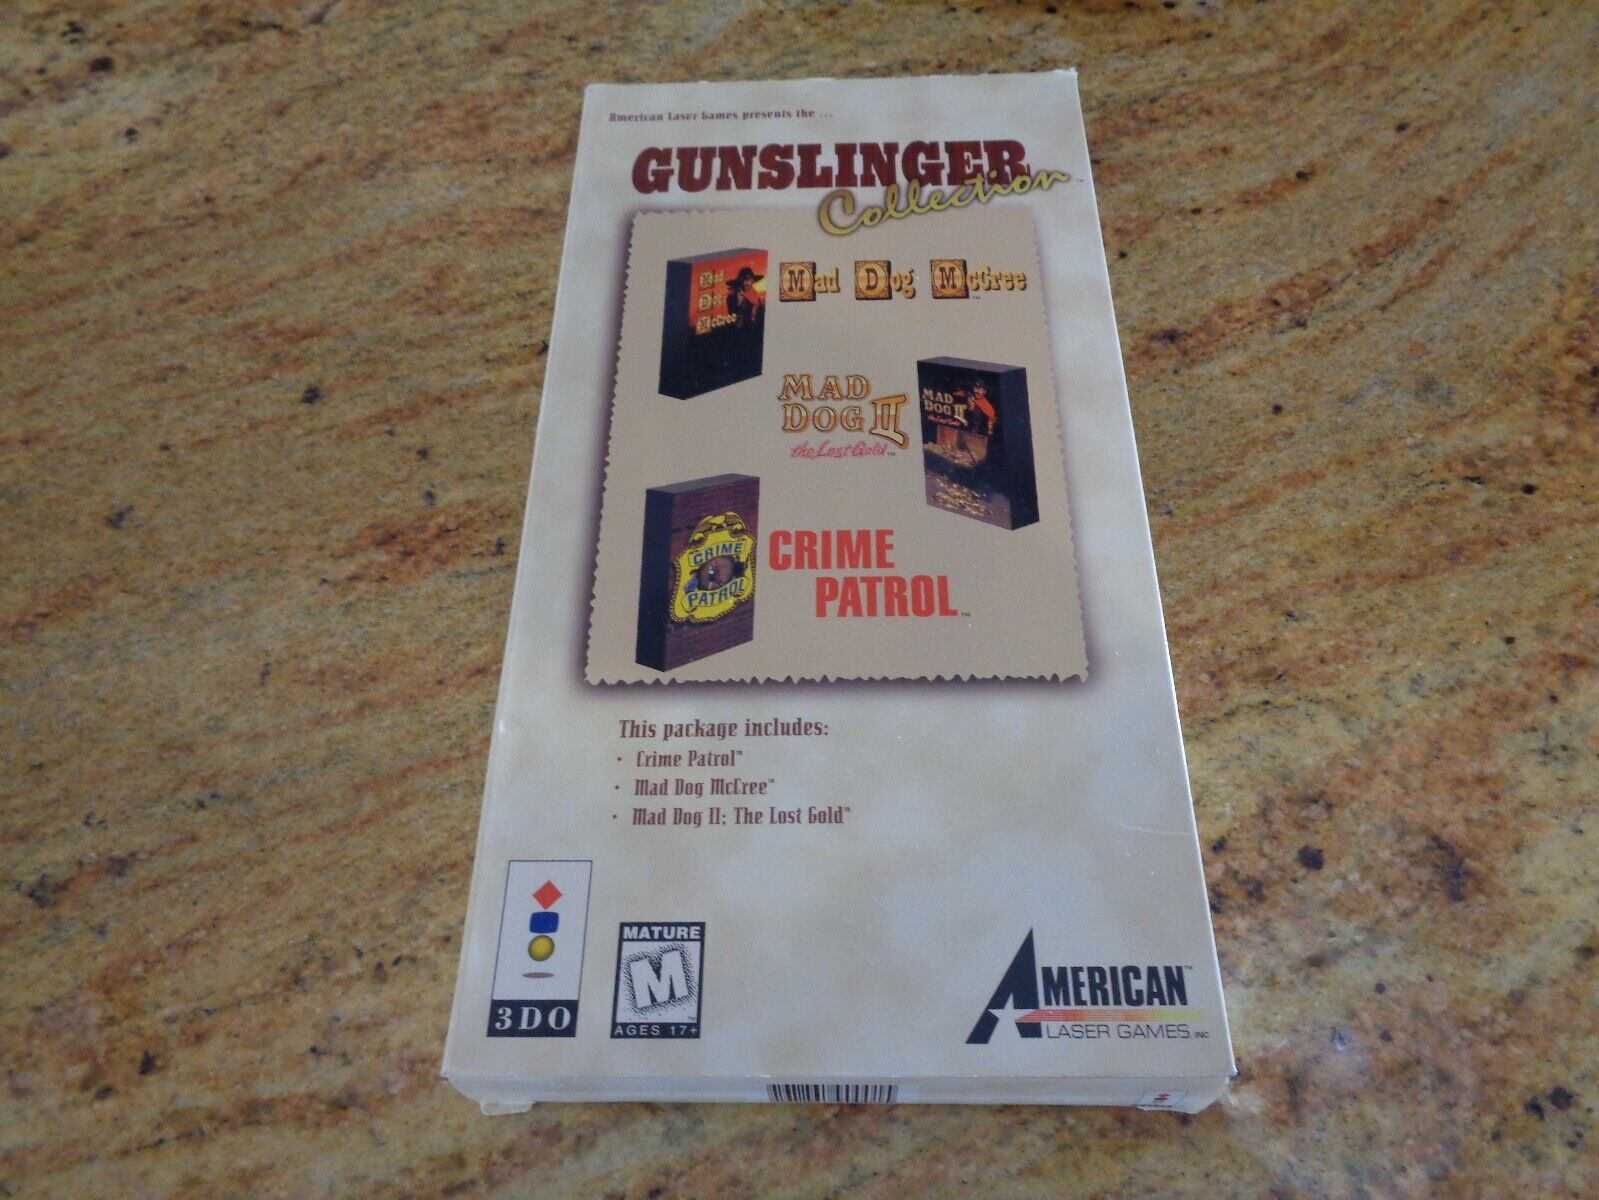 Gunslinger Collection (3DO, 1995) for the 3DO System - With Longbox and Manual!!